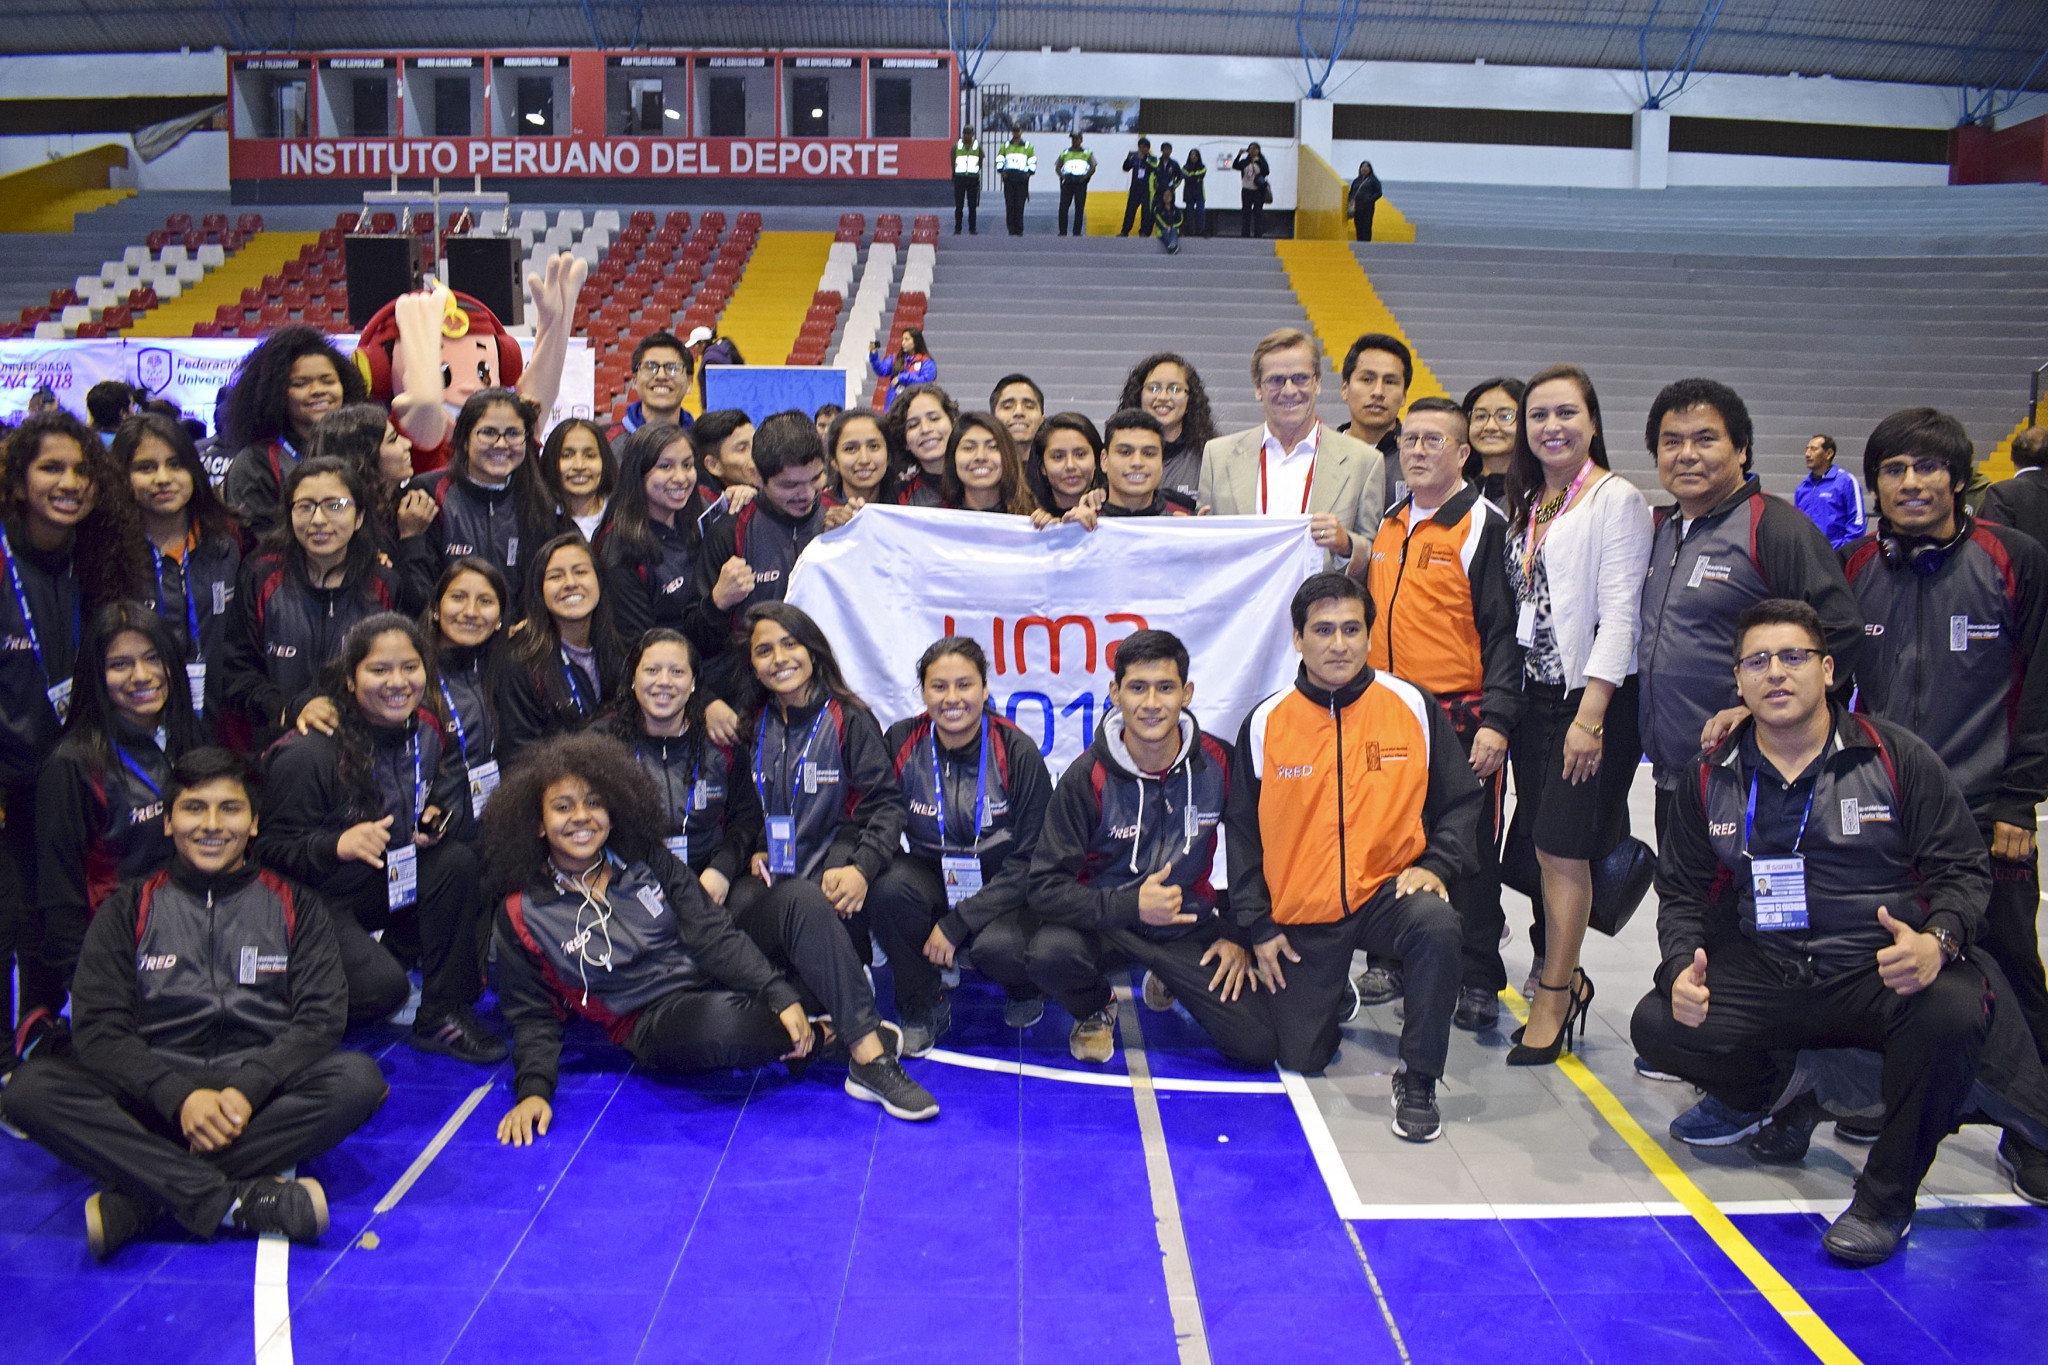 Lima 2019 Volunteer Programme promoted at National University Games in Tacna